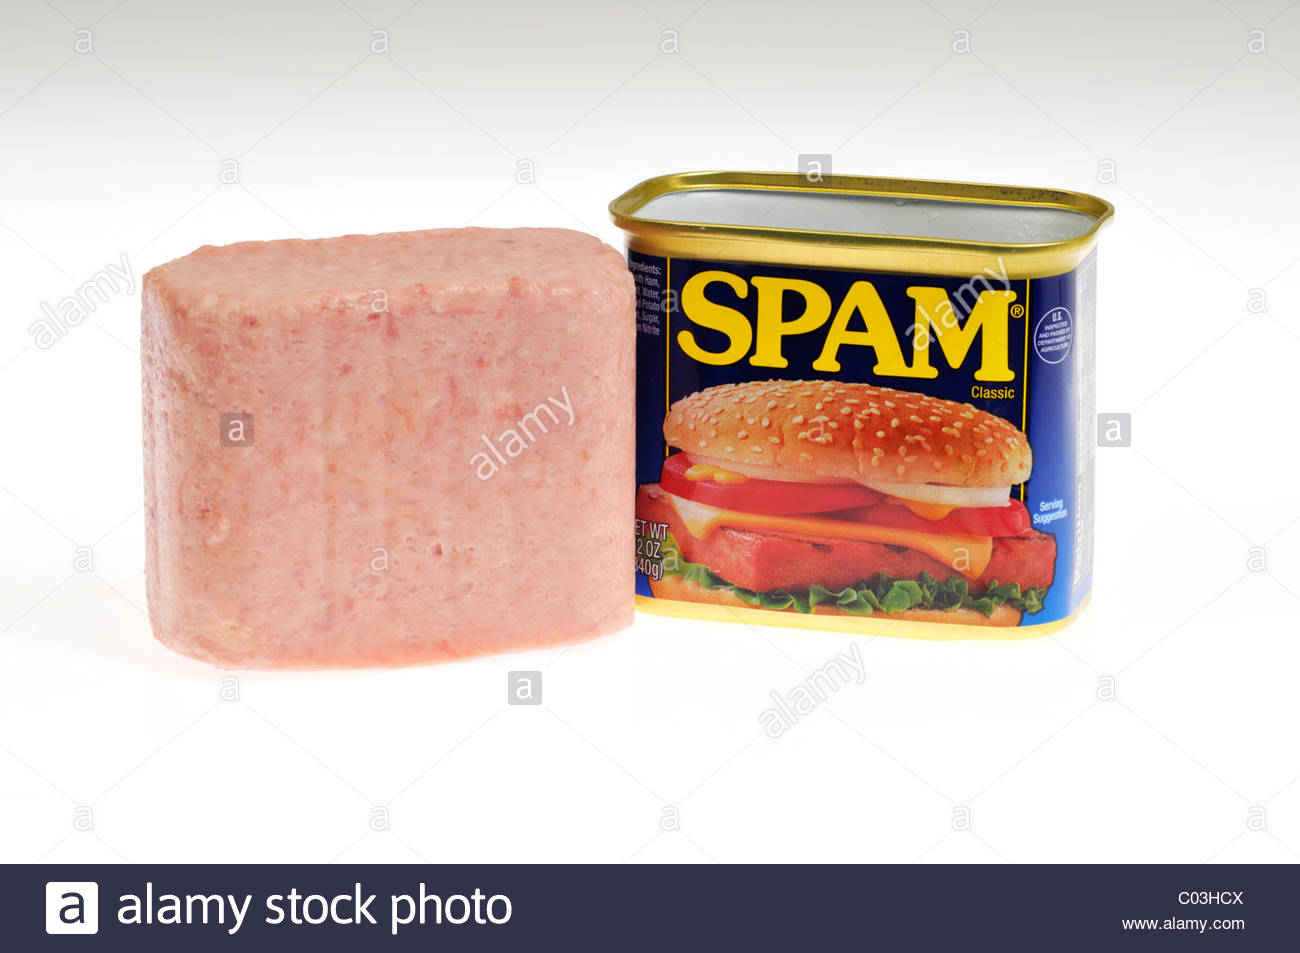 Tin Can Of Hormel Foods Spam Opened With Meat Next To The